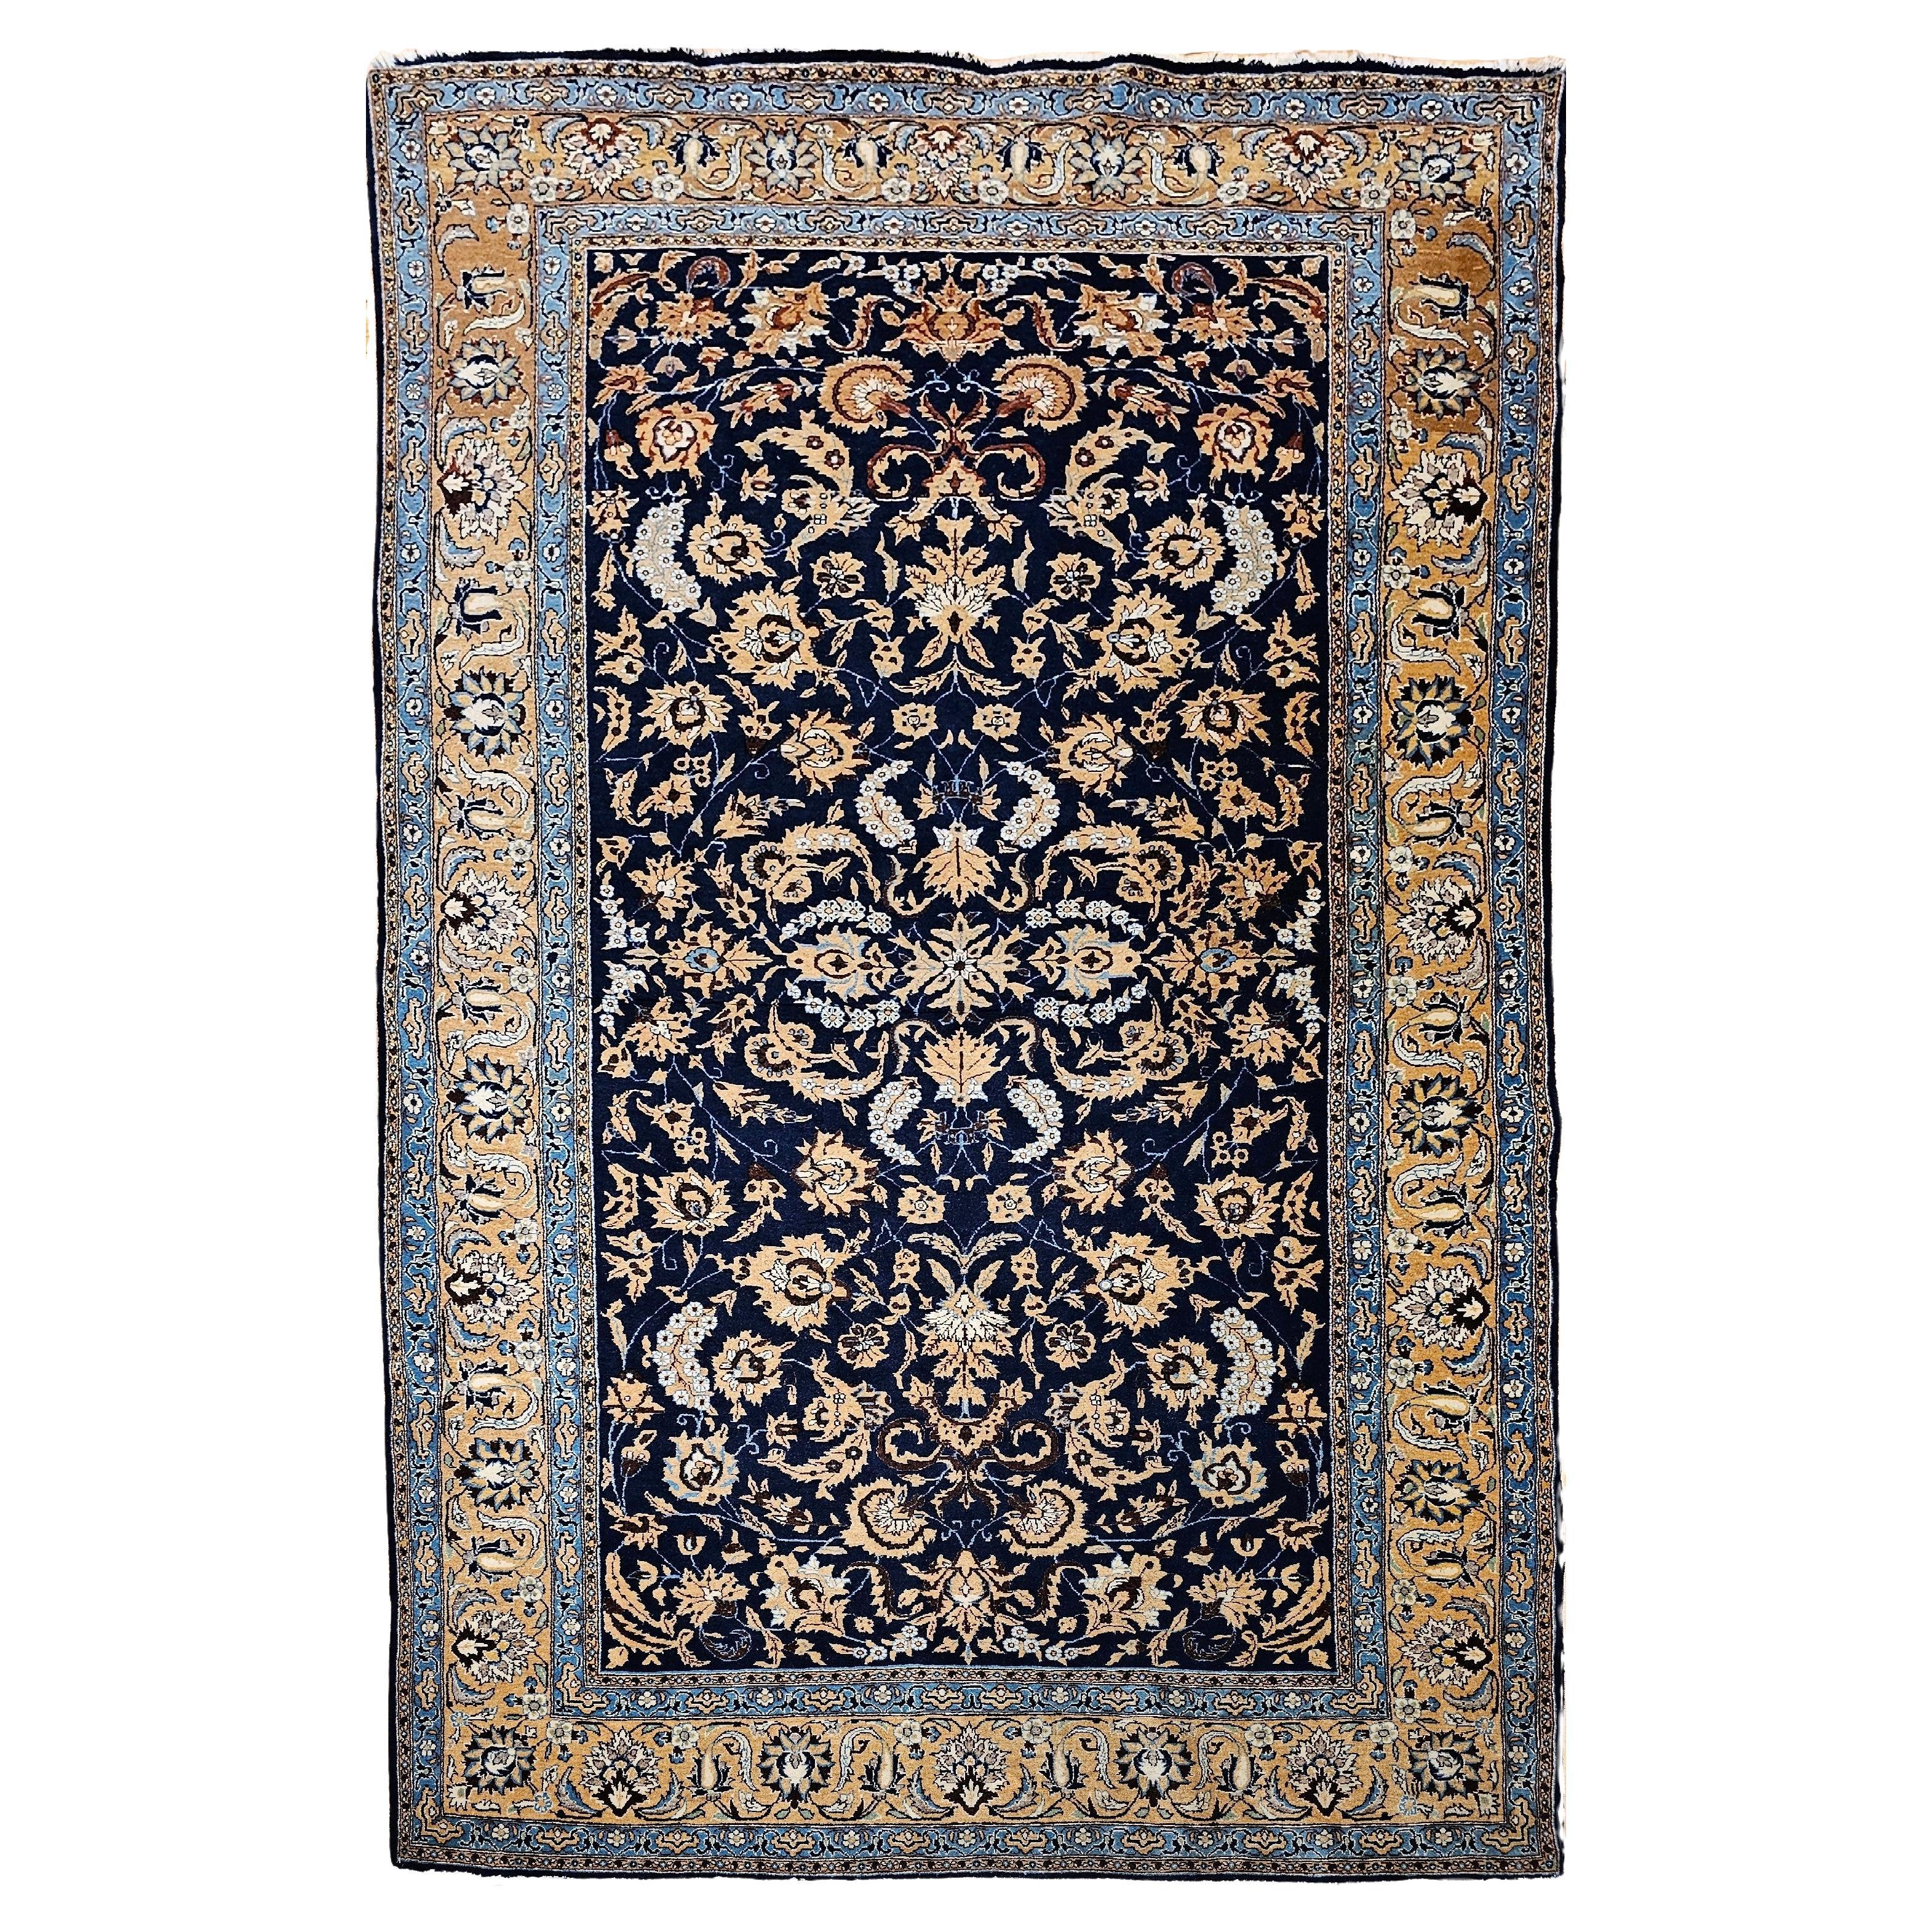 Vintage Persian Tabriz in an Allover Pattern in Navy Blue, Tan, Brown, Baby Blue